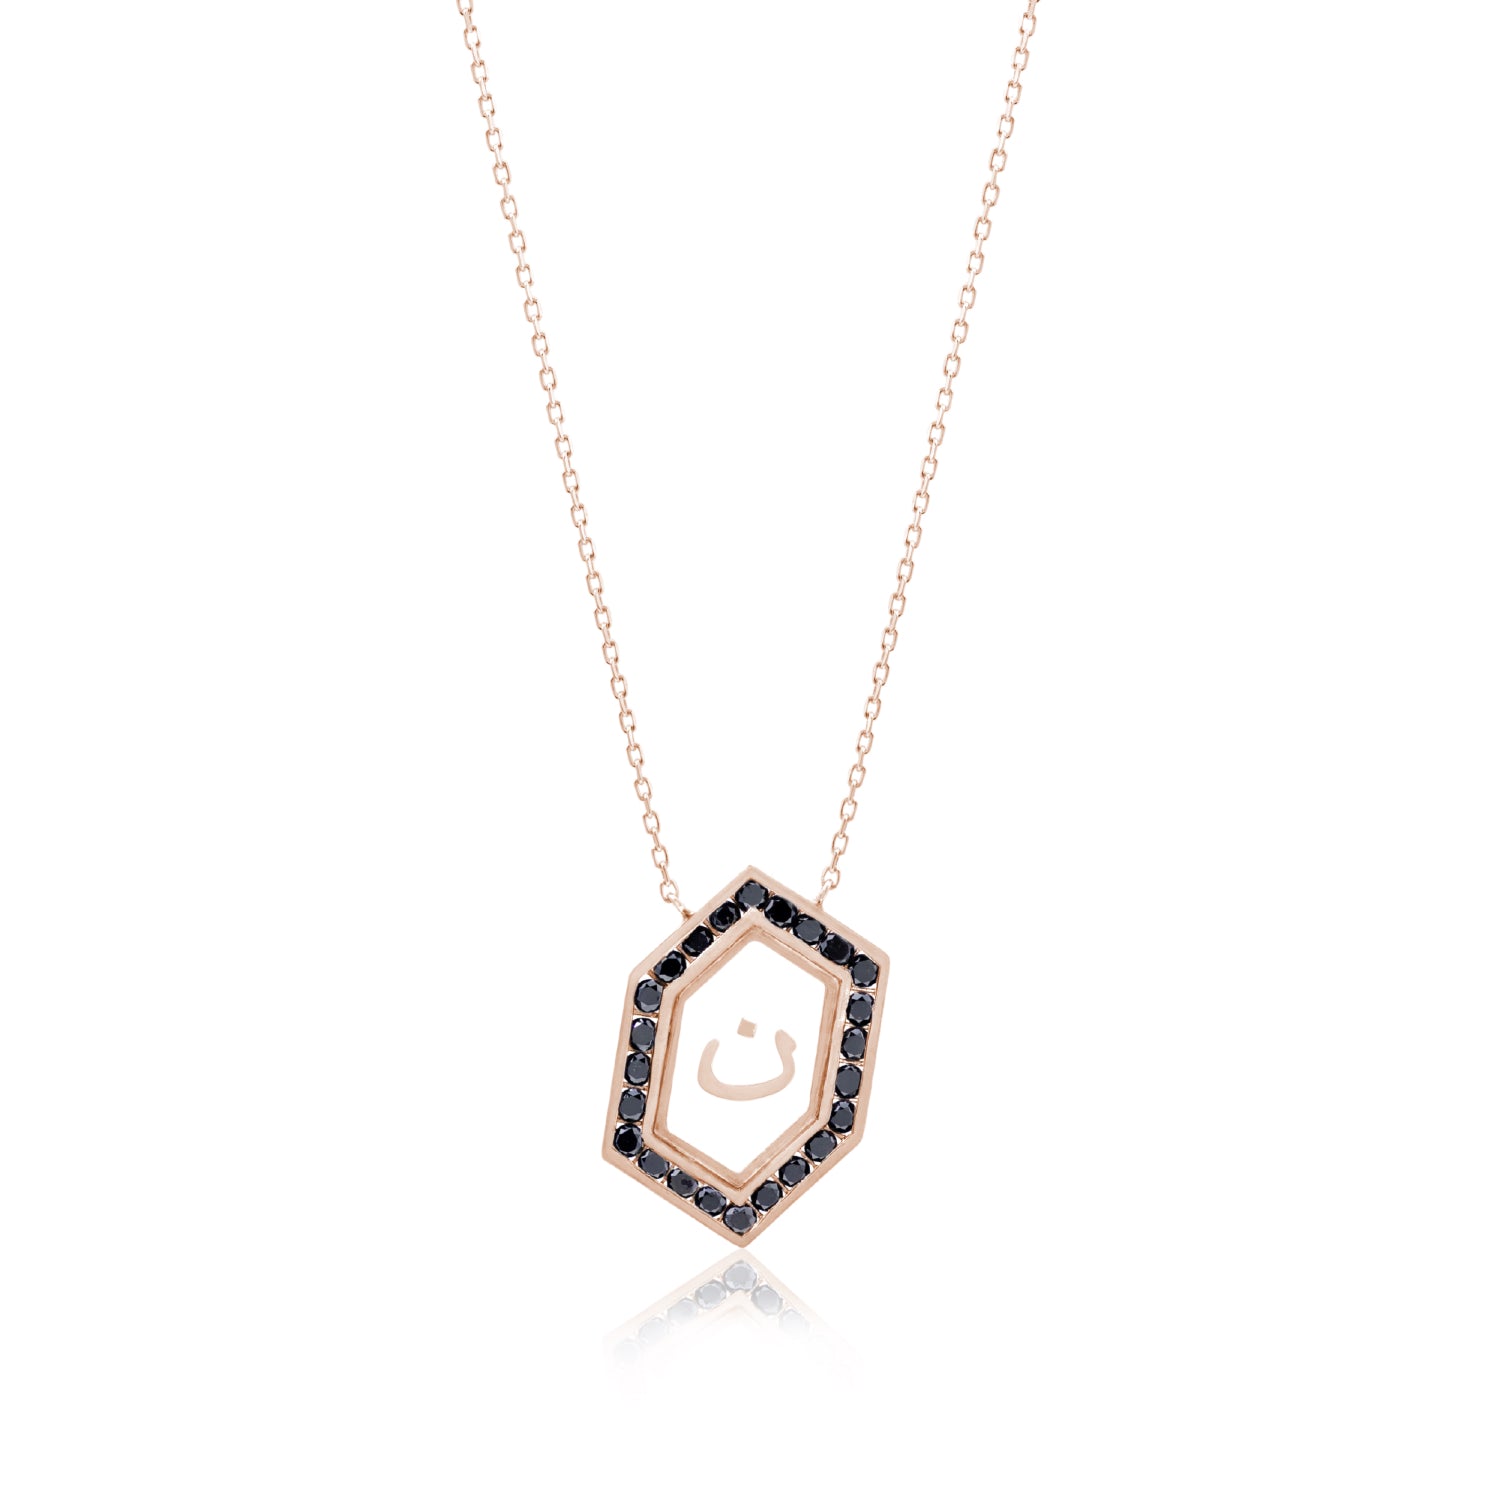 Qamoos 1.0 Letter ن Black Diamond Necklace in Rose Gold